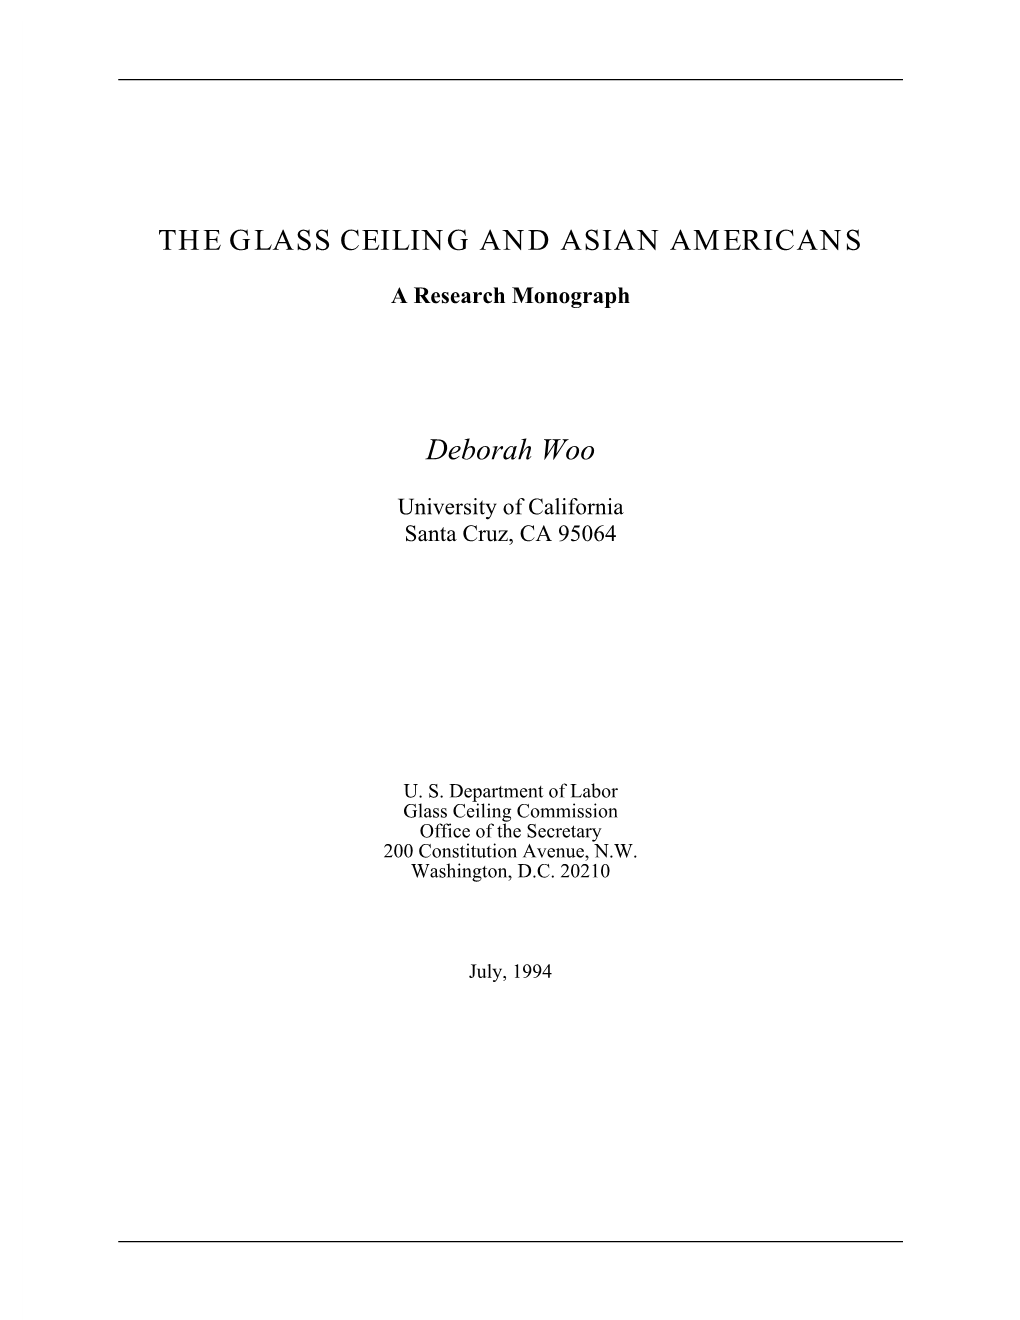 The Glass Ceiling and Asian Americans